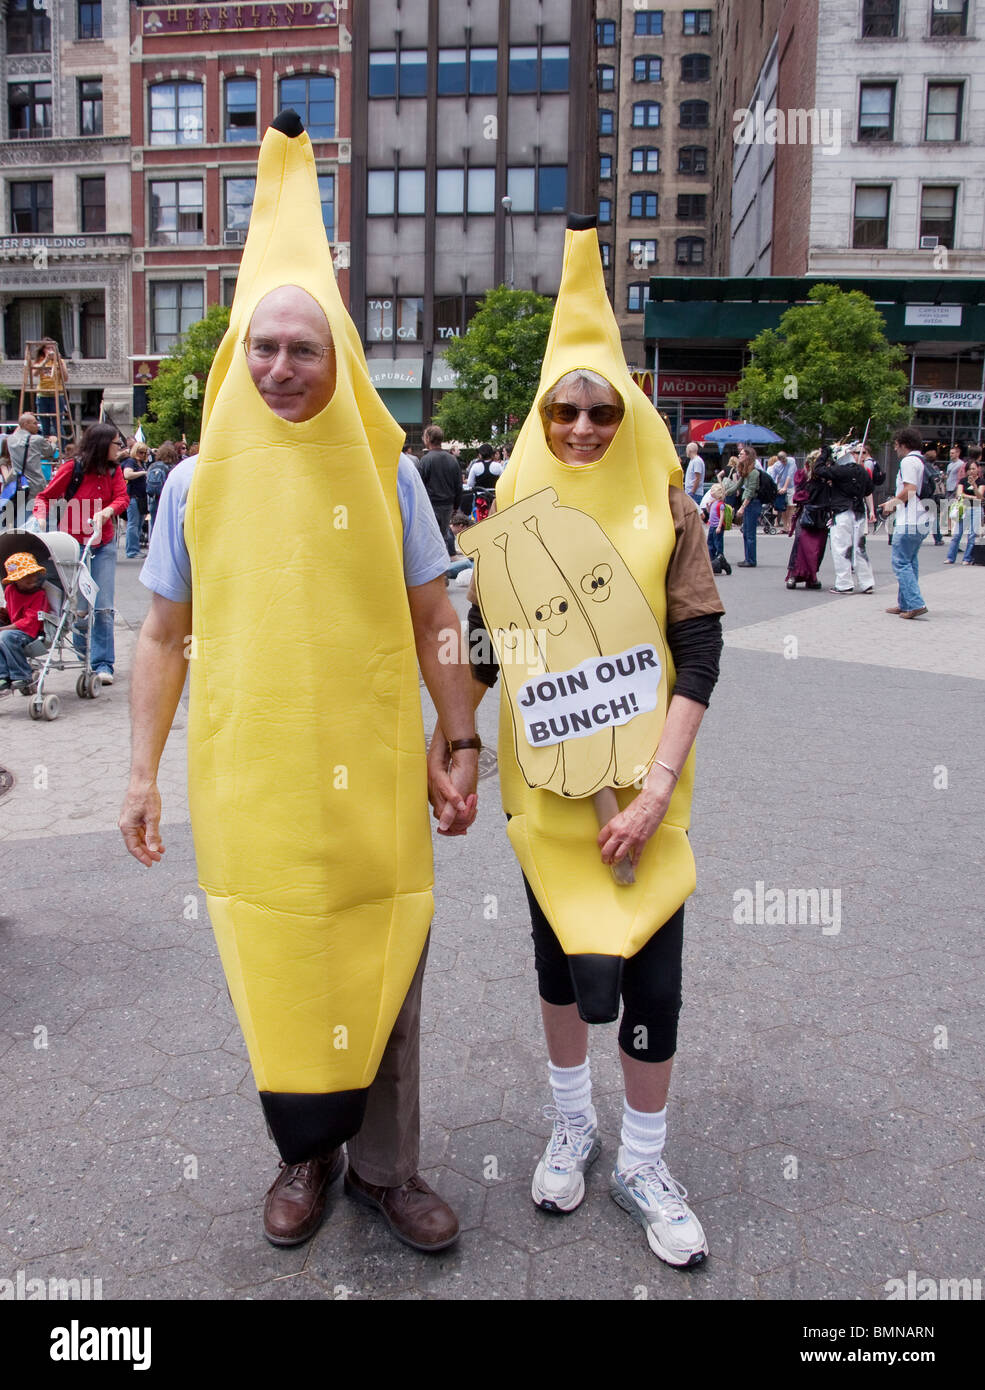 Vegetarians dressed as bananas participate in the Veggie Pride Parade in New York City. Stock Photo